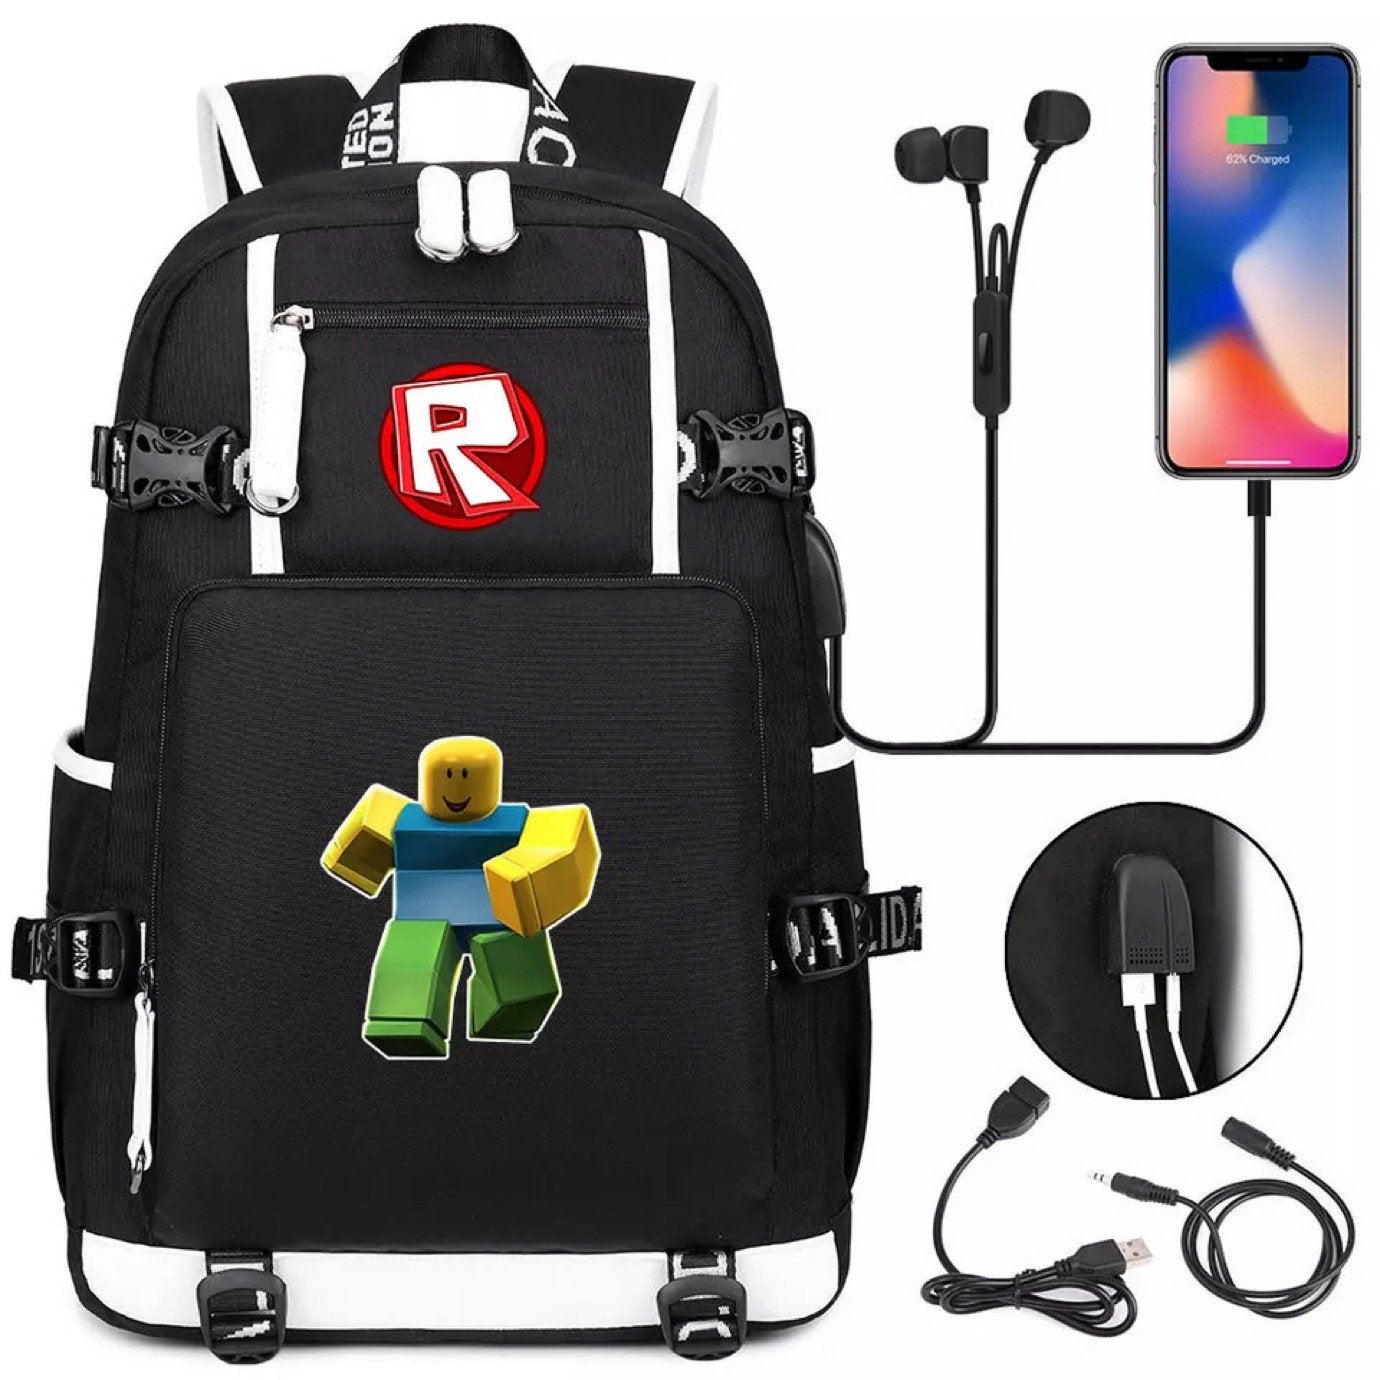 Roblox 2 Usb Charging Backpack School Note Book Laptop Travel Bags Bag Picky - mesh suitcase roblox